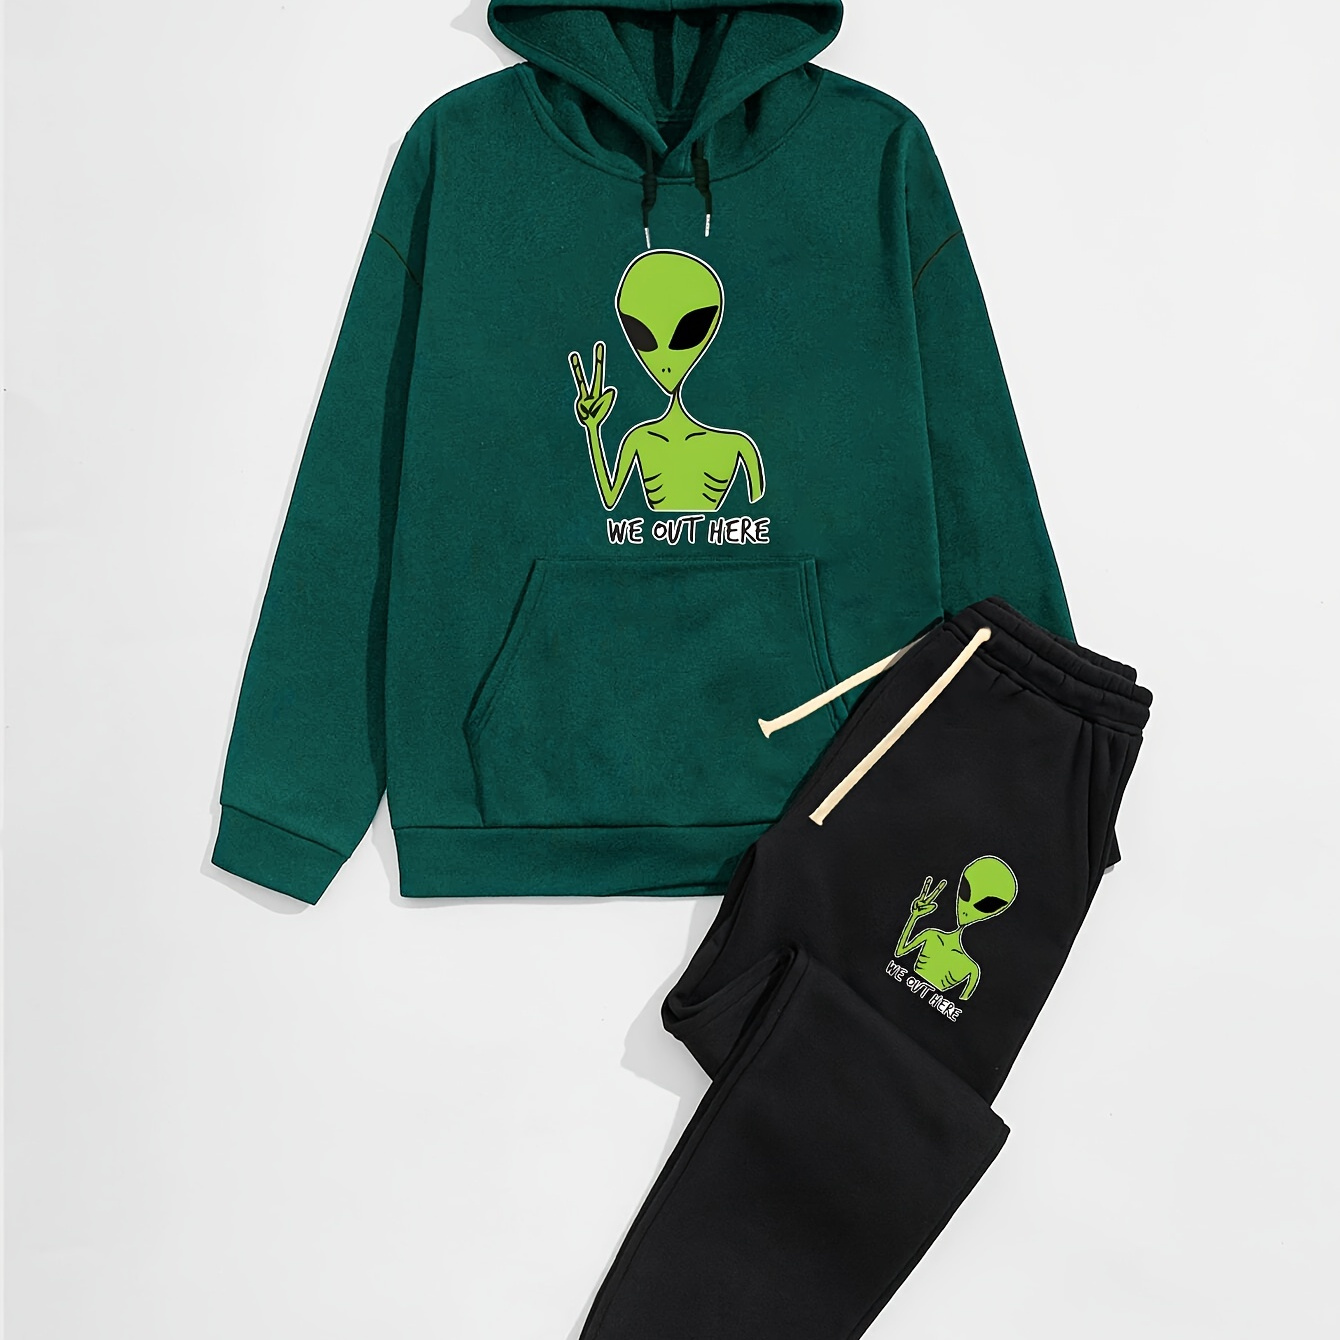 

Funny Alien Print, Men's 2pcs Outfits, Casual Hoodies Long Sleeve Pullover Hooded Sweatshirt And Sweatpants Joggers Set For Spring Fall, Men's Clothing